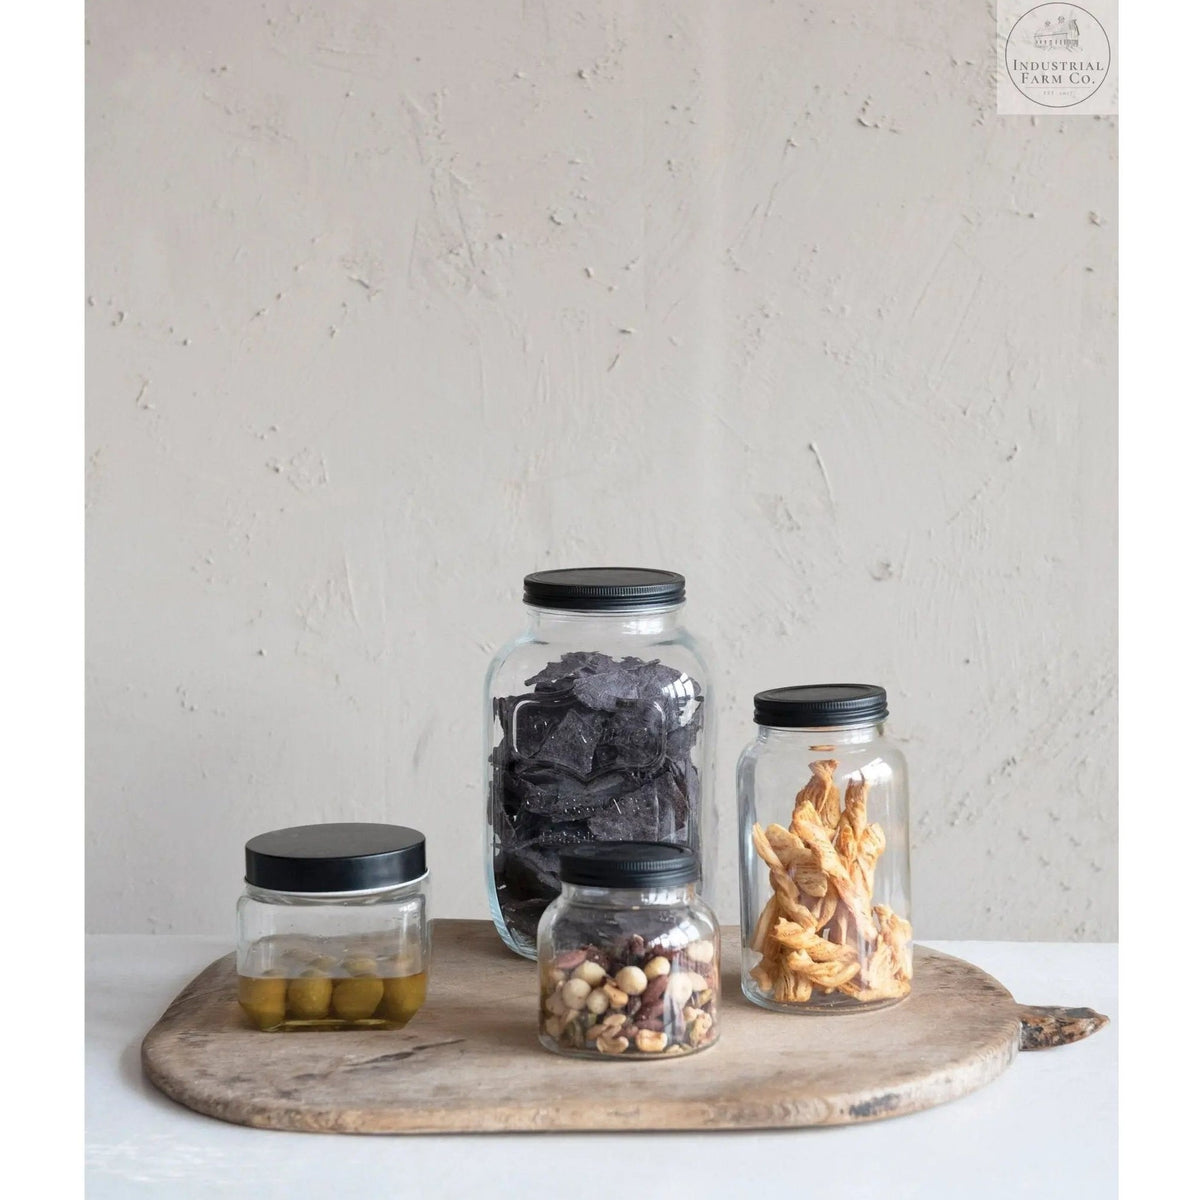 Glass Jar With Metal Lid  Small Square   | Industrial Farm Co